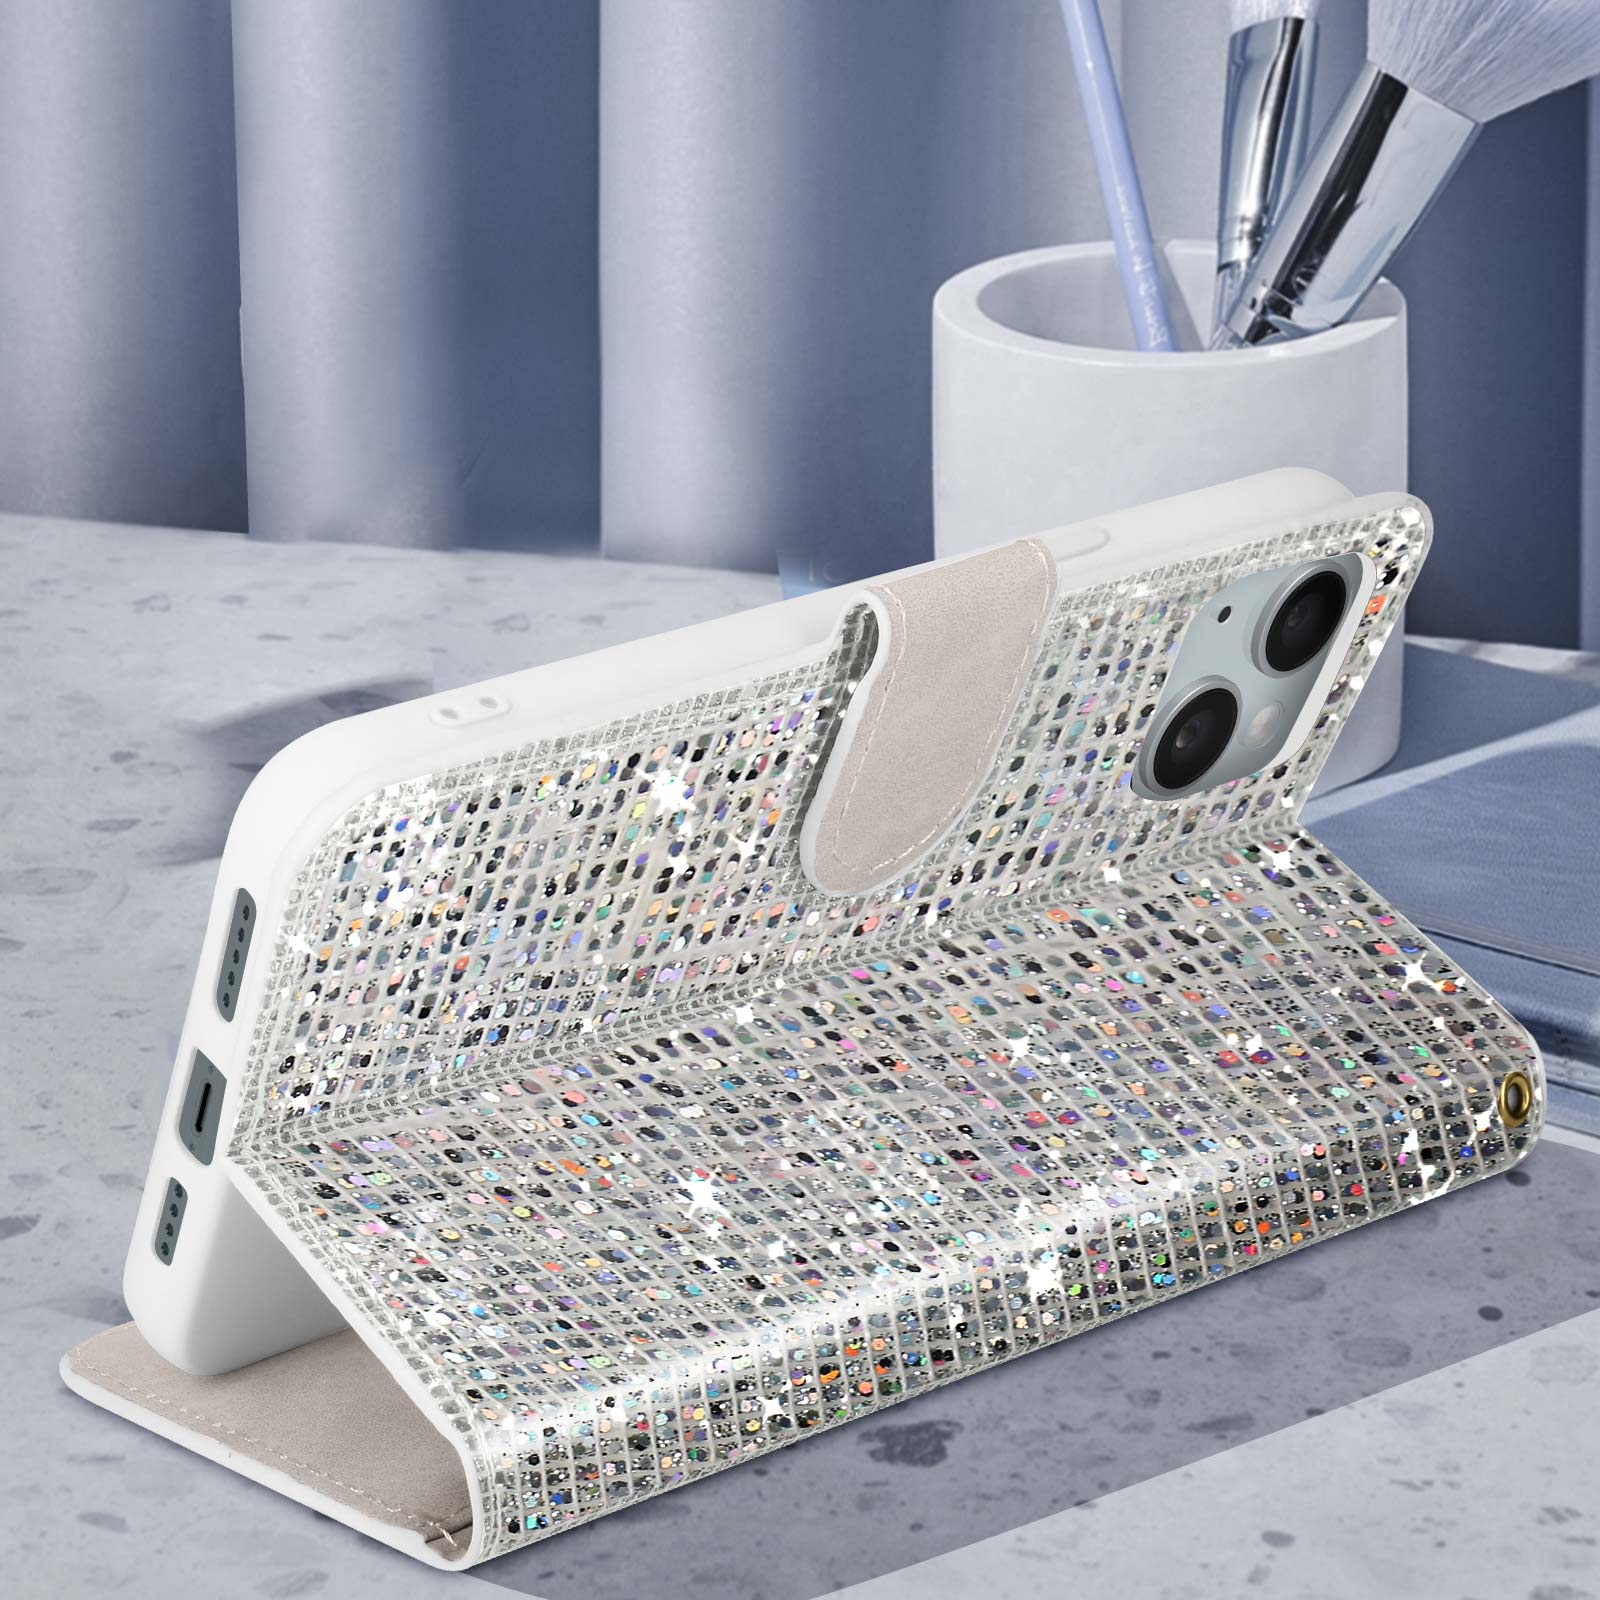 Edition AVIZAR Series, 14, Apple, Disco Silber iPhone Glam Bookcover,